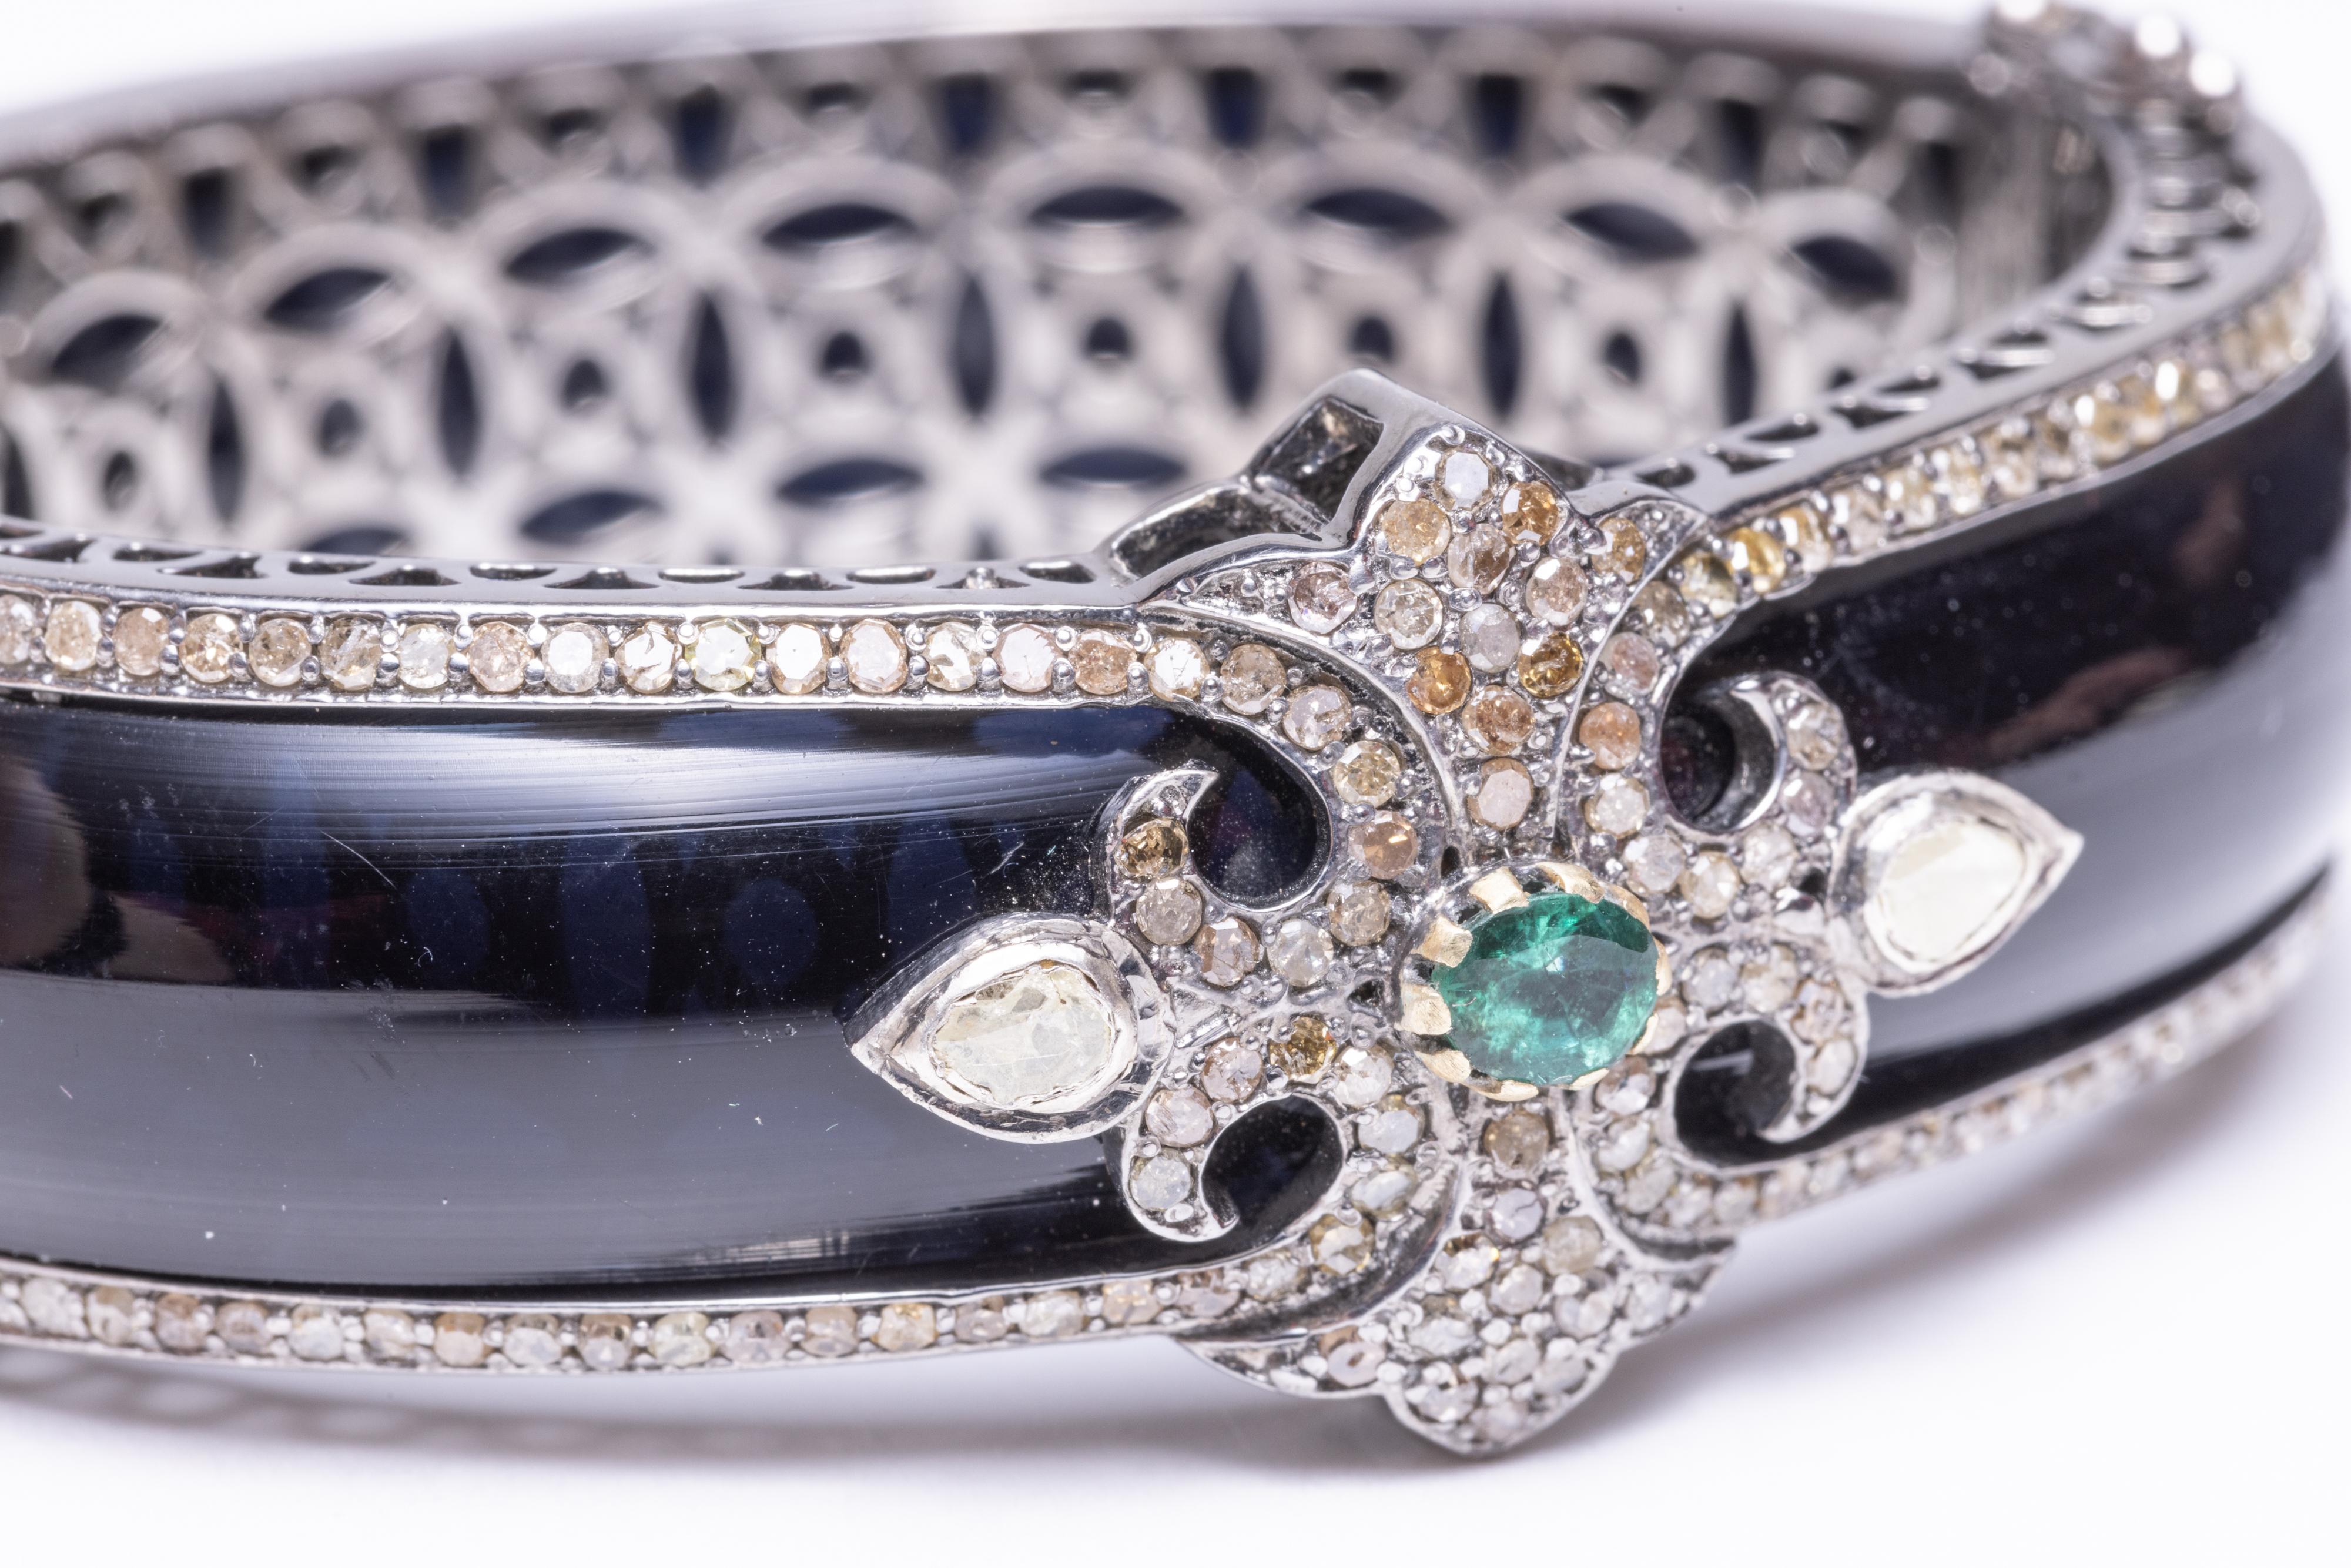 A stunning cuff bracelet in black Bakelite bordered on both sides with pave` set diamonds.  The top features additional pave` set diamonds with an oval, faceted emerald and two rose-cut diamonds on each side.  Inside circumference is 6 1/8th inch. 